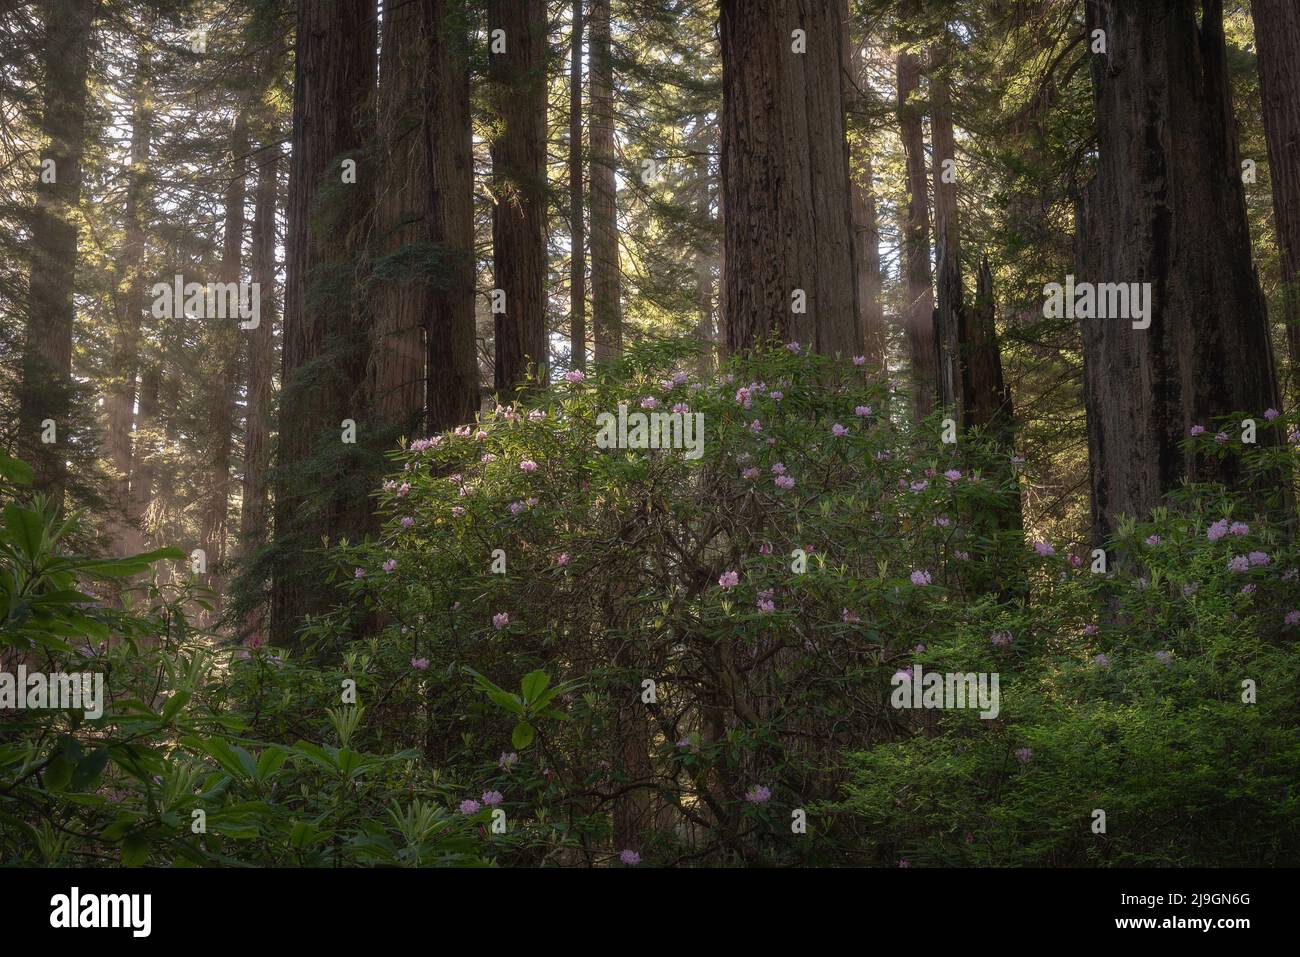 Rhododendron's blooming among the tall trees off the Redwoods National and State Park forest, California Stock Photo